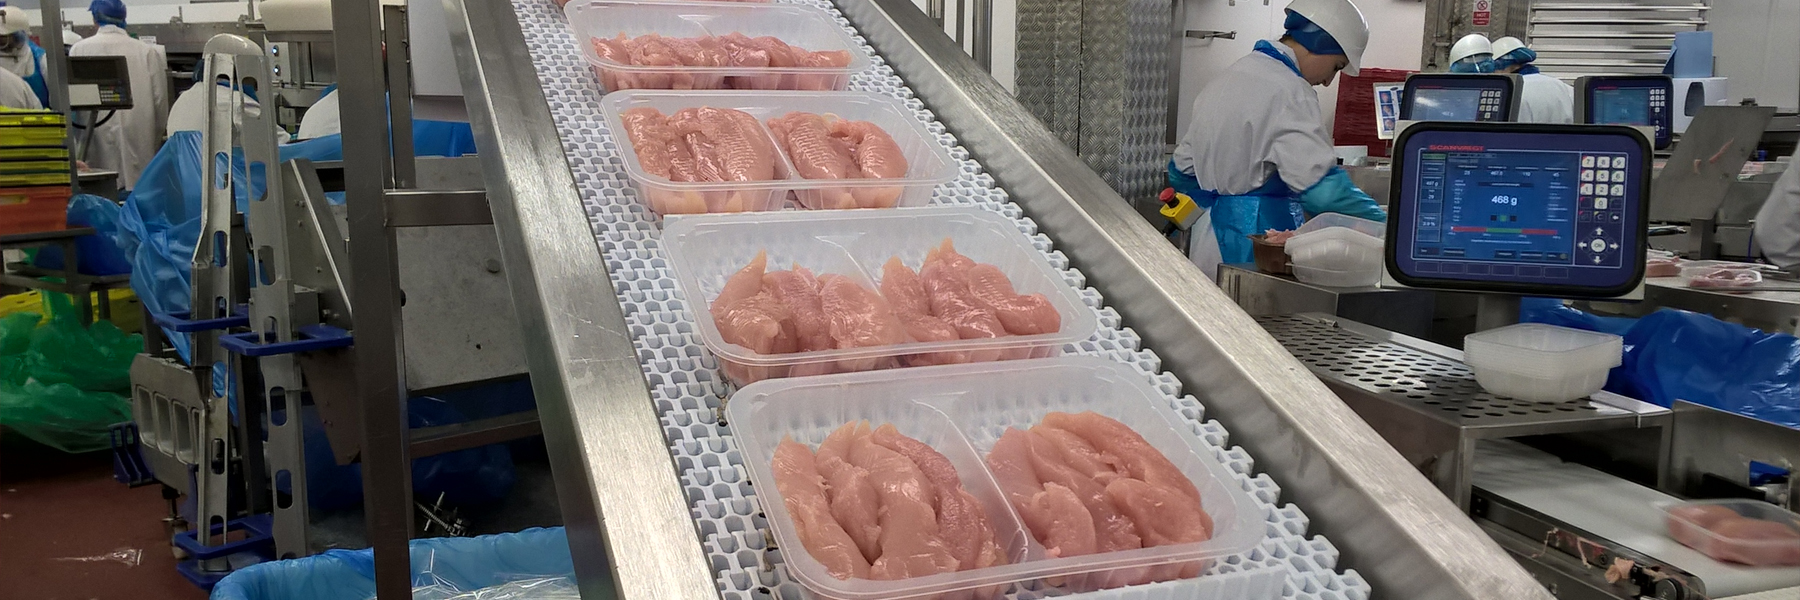 Chicken on a production line